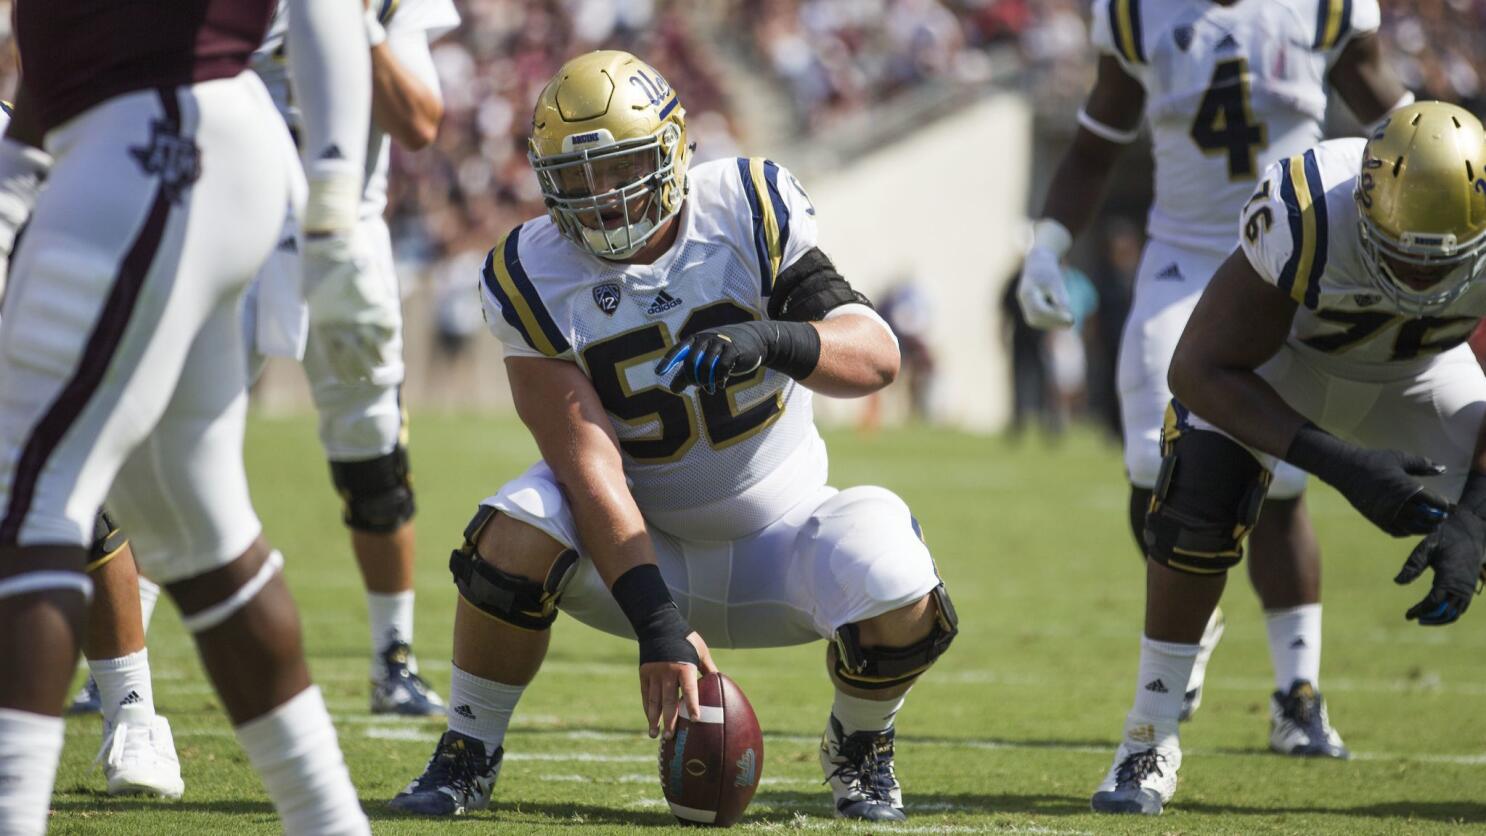 La Costa Canyon grad Scott Quessenberry selected by Chargers in